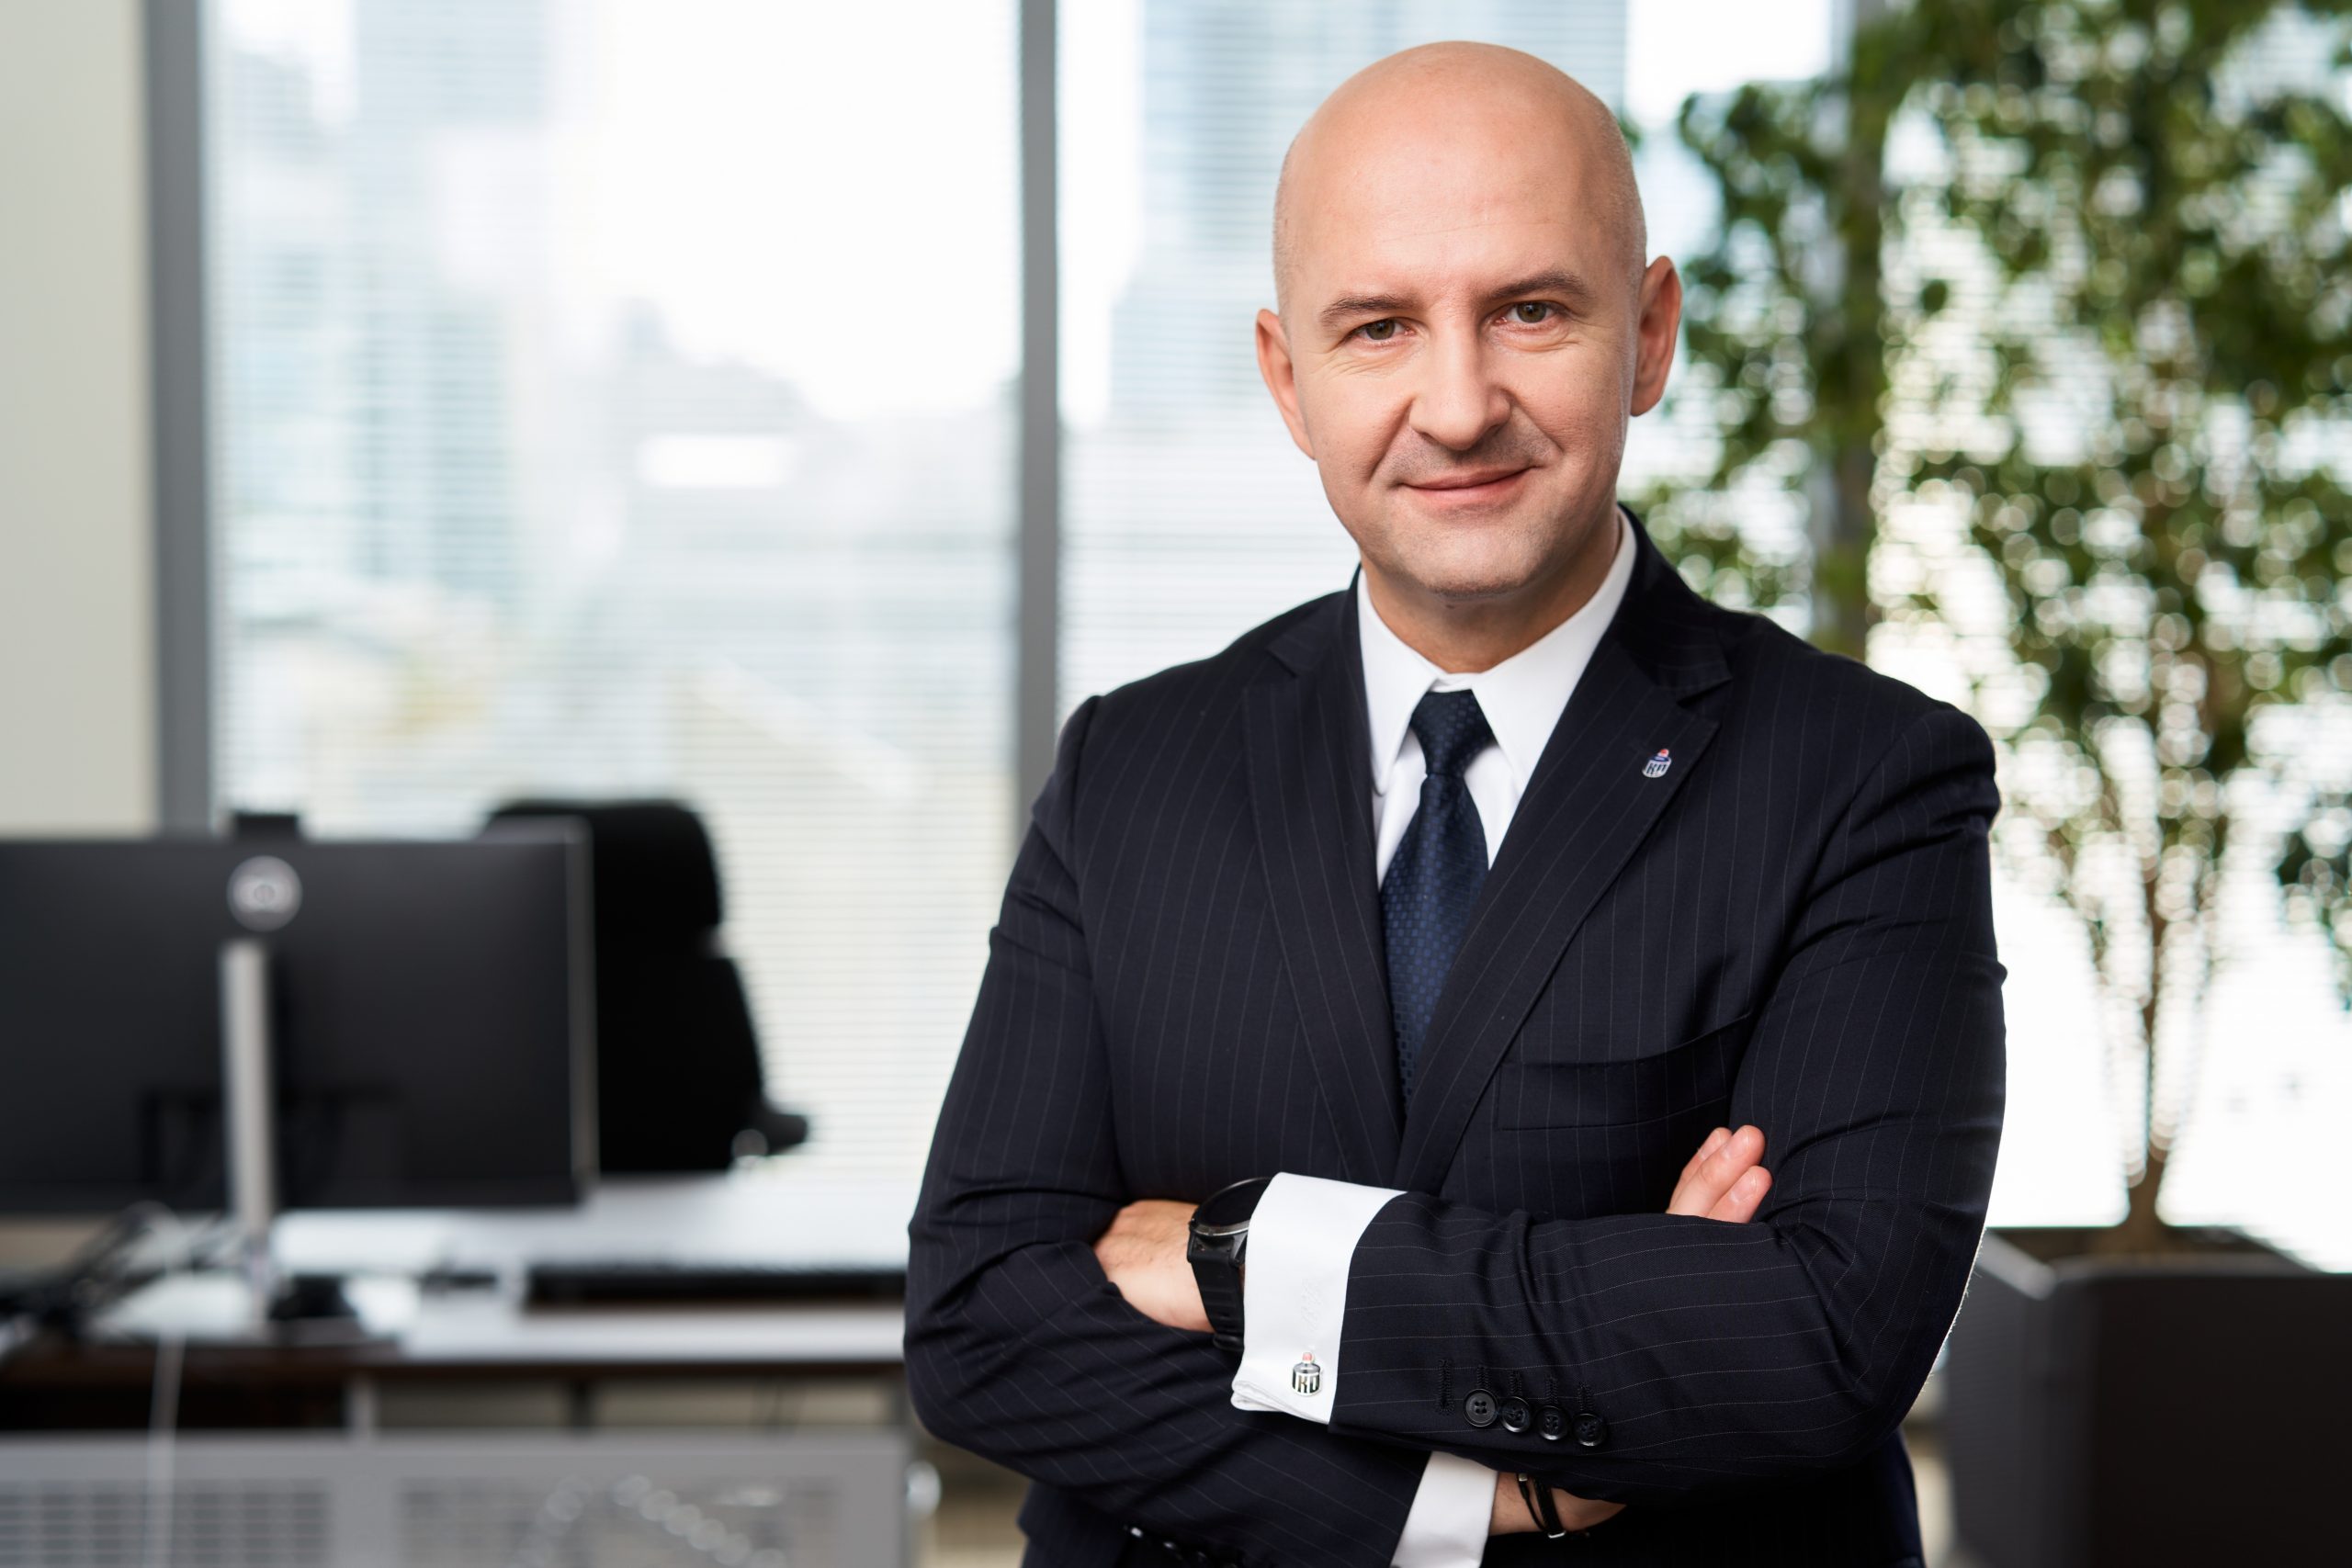 PKO Leasing: the leader of the Polish market has turned 25. Interview with Paweł Pach, President of the Management Board at PKO Leasing.